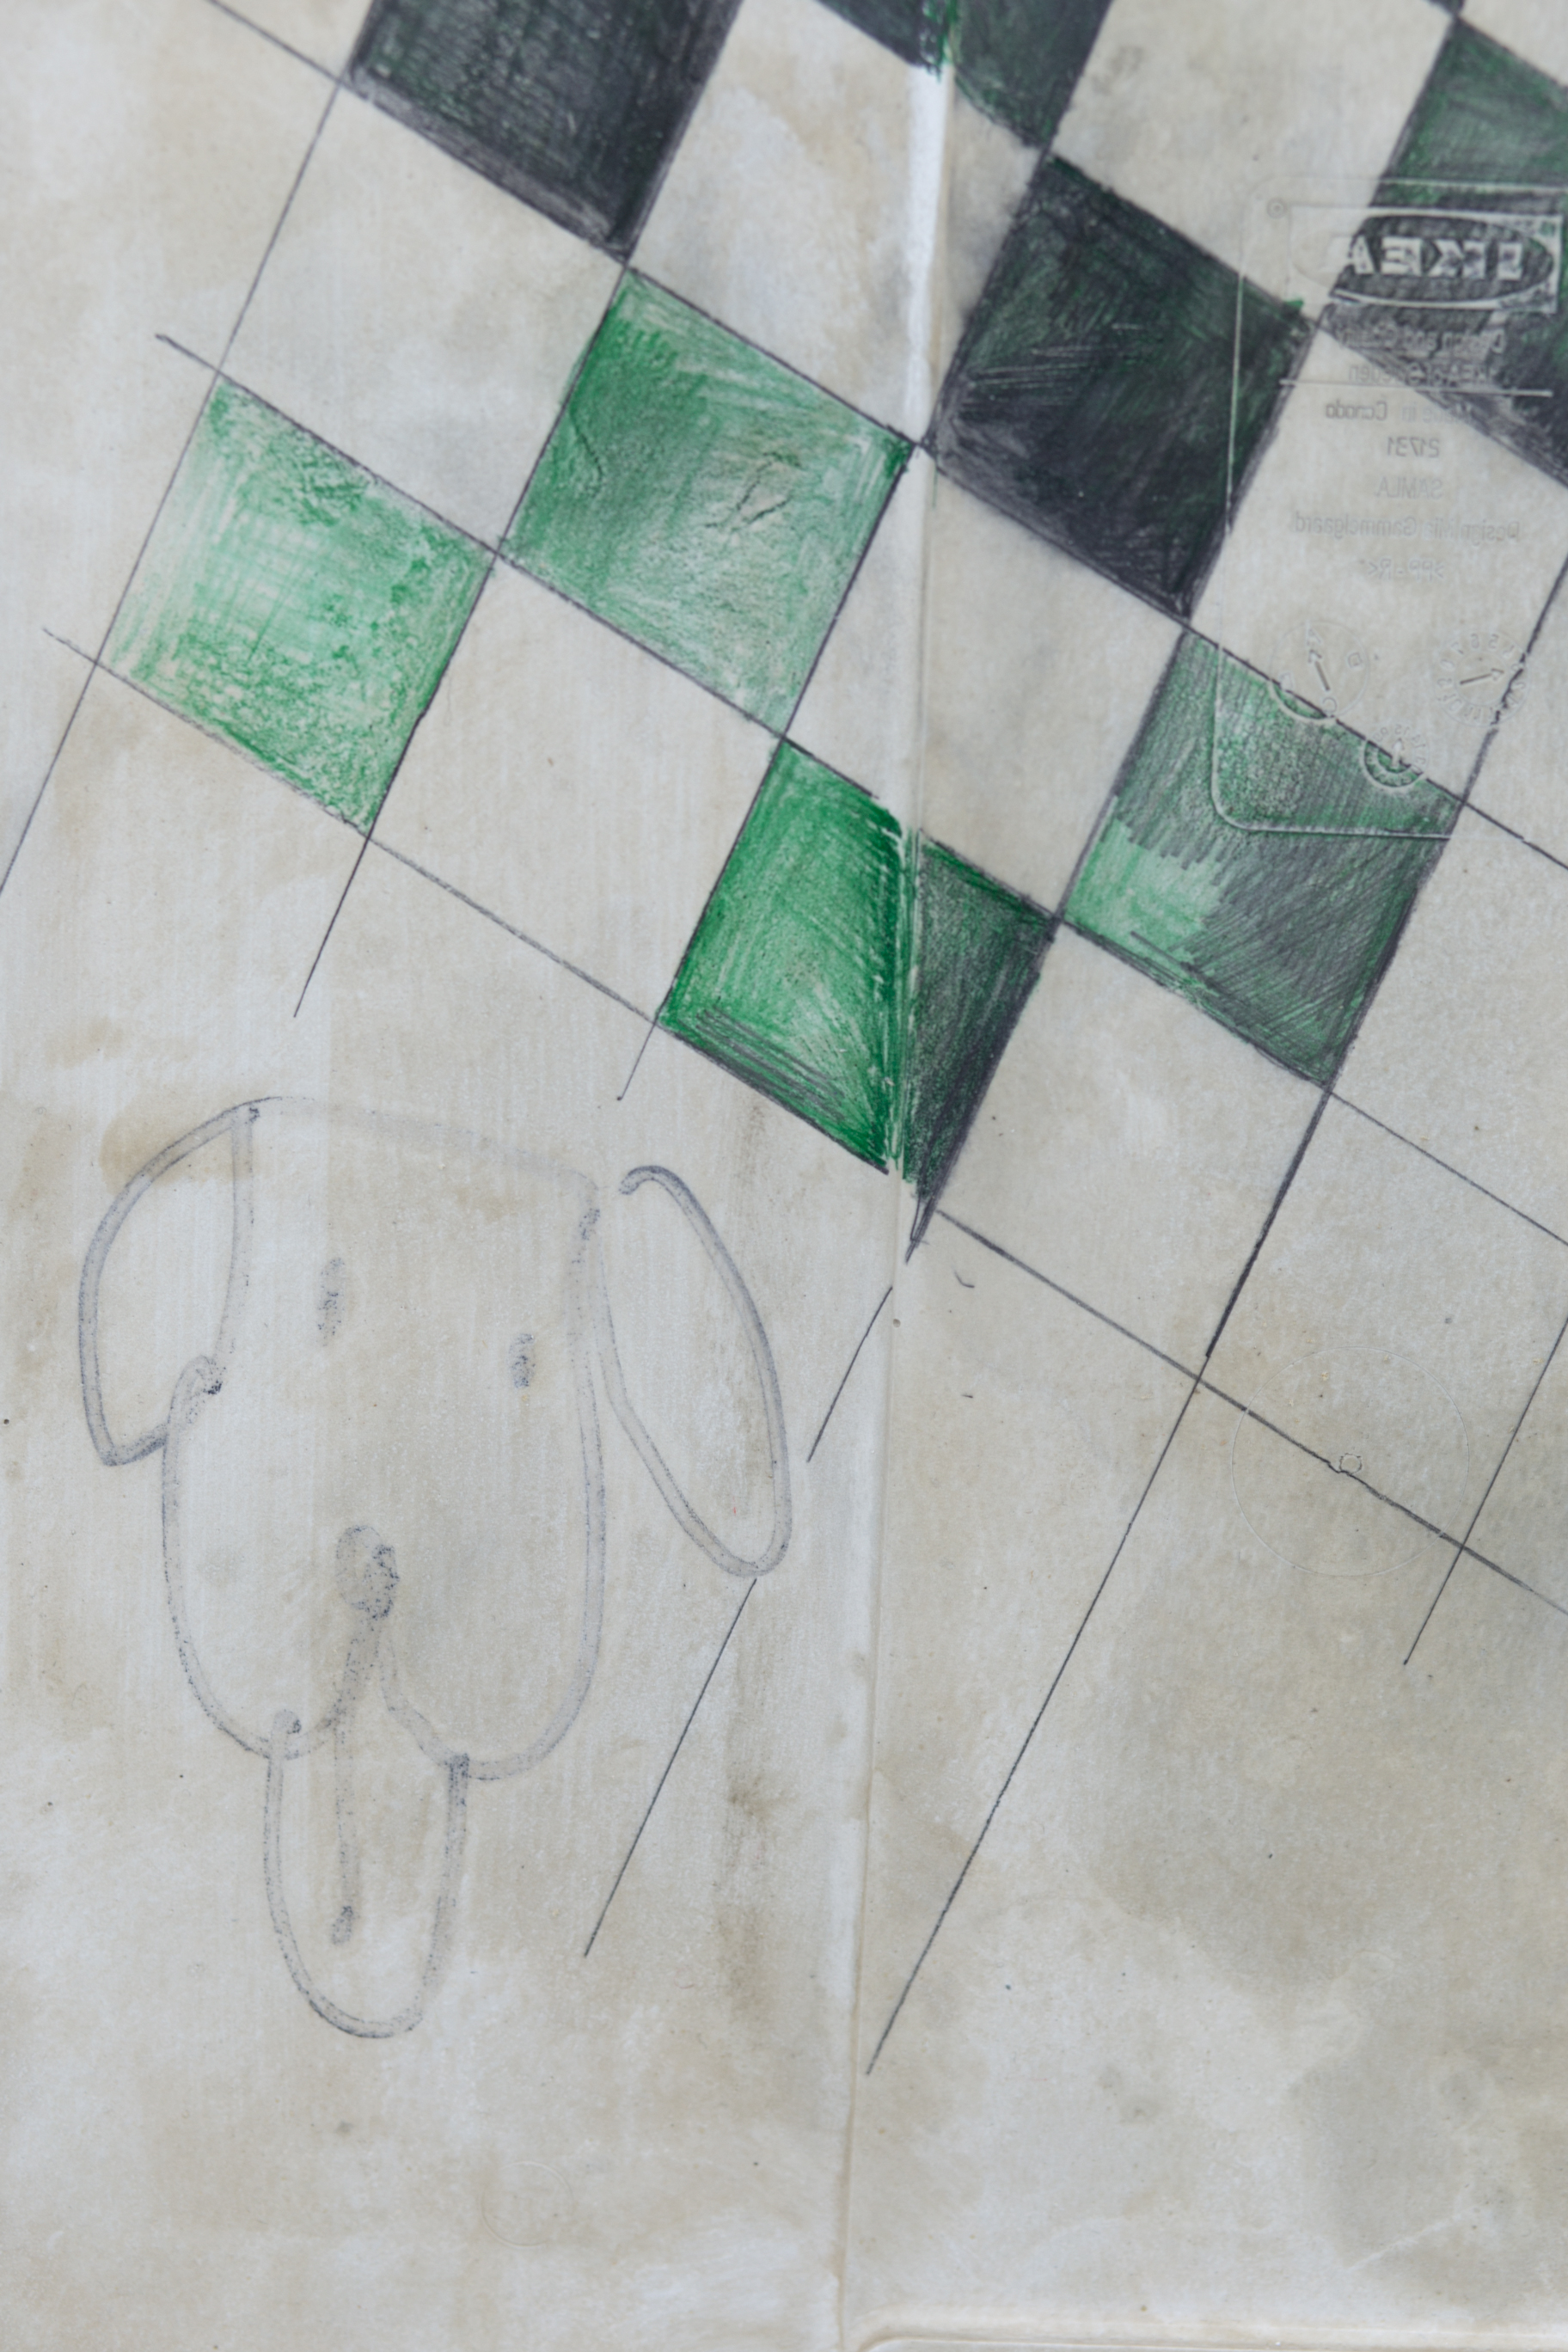 A close up of the green chessboard and dog drawing